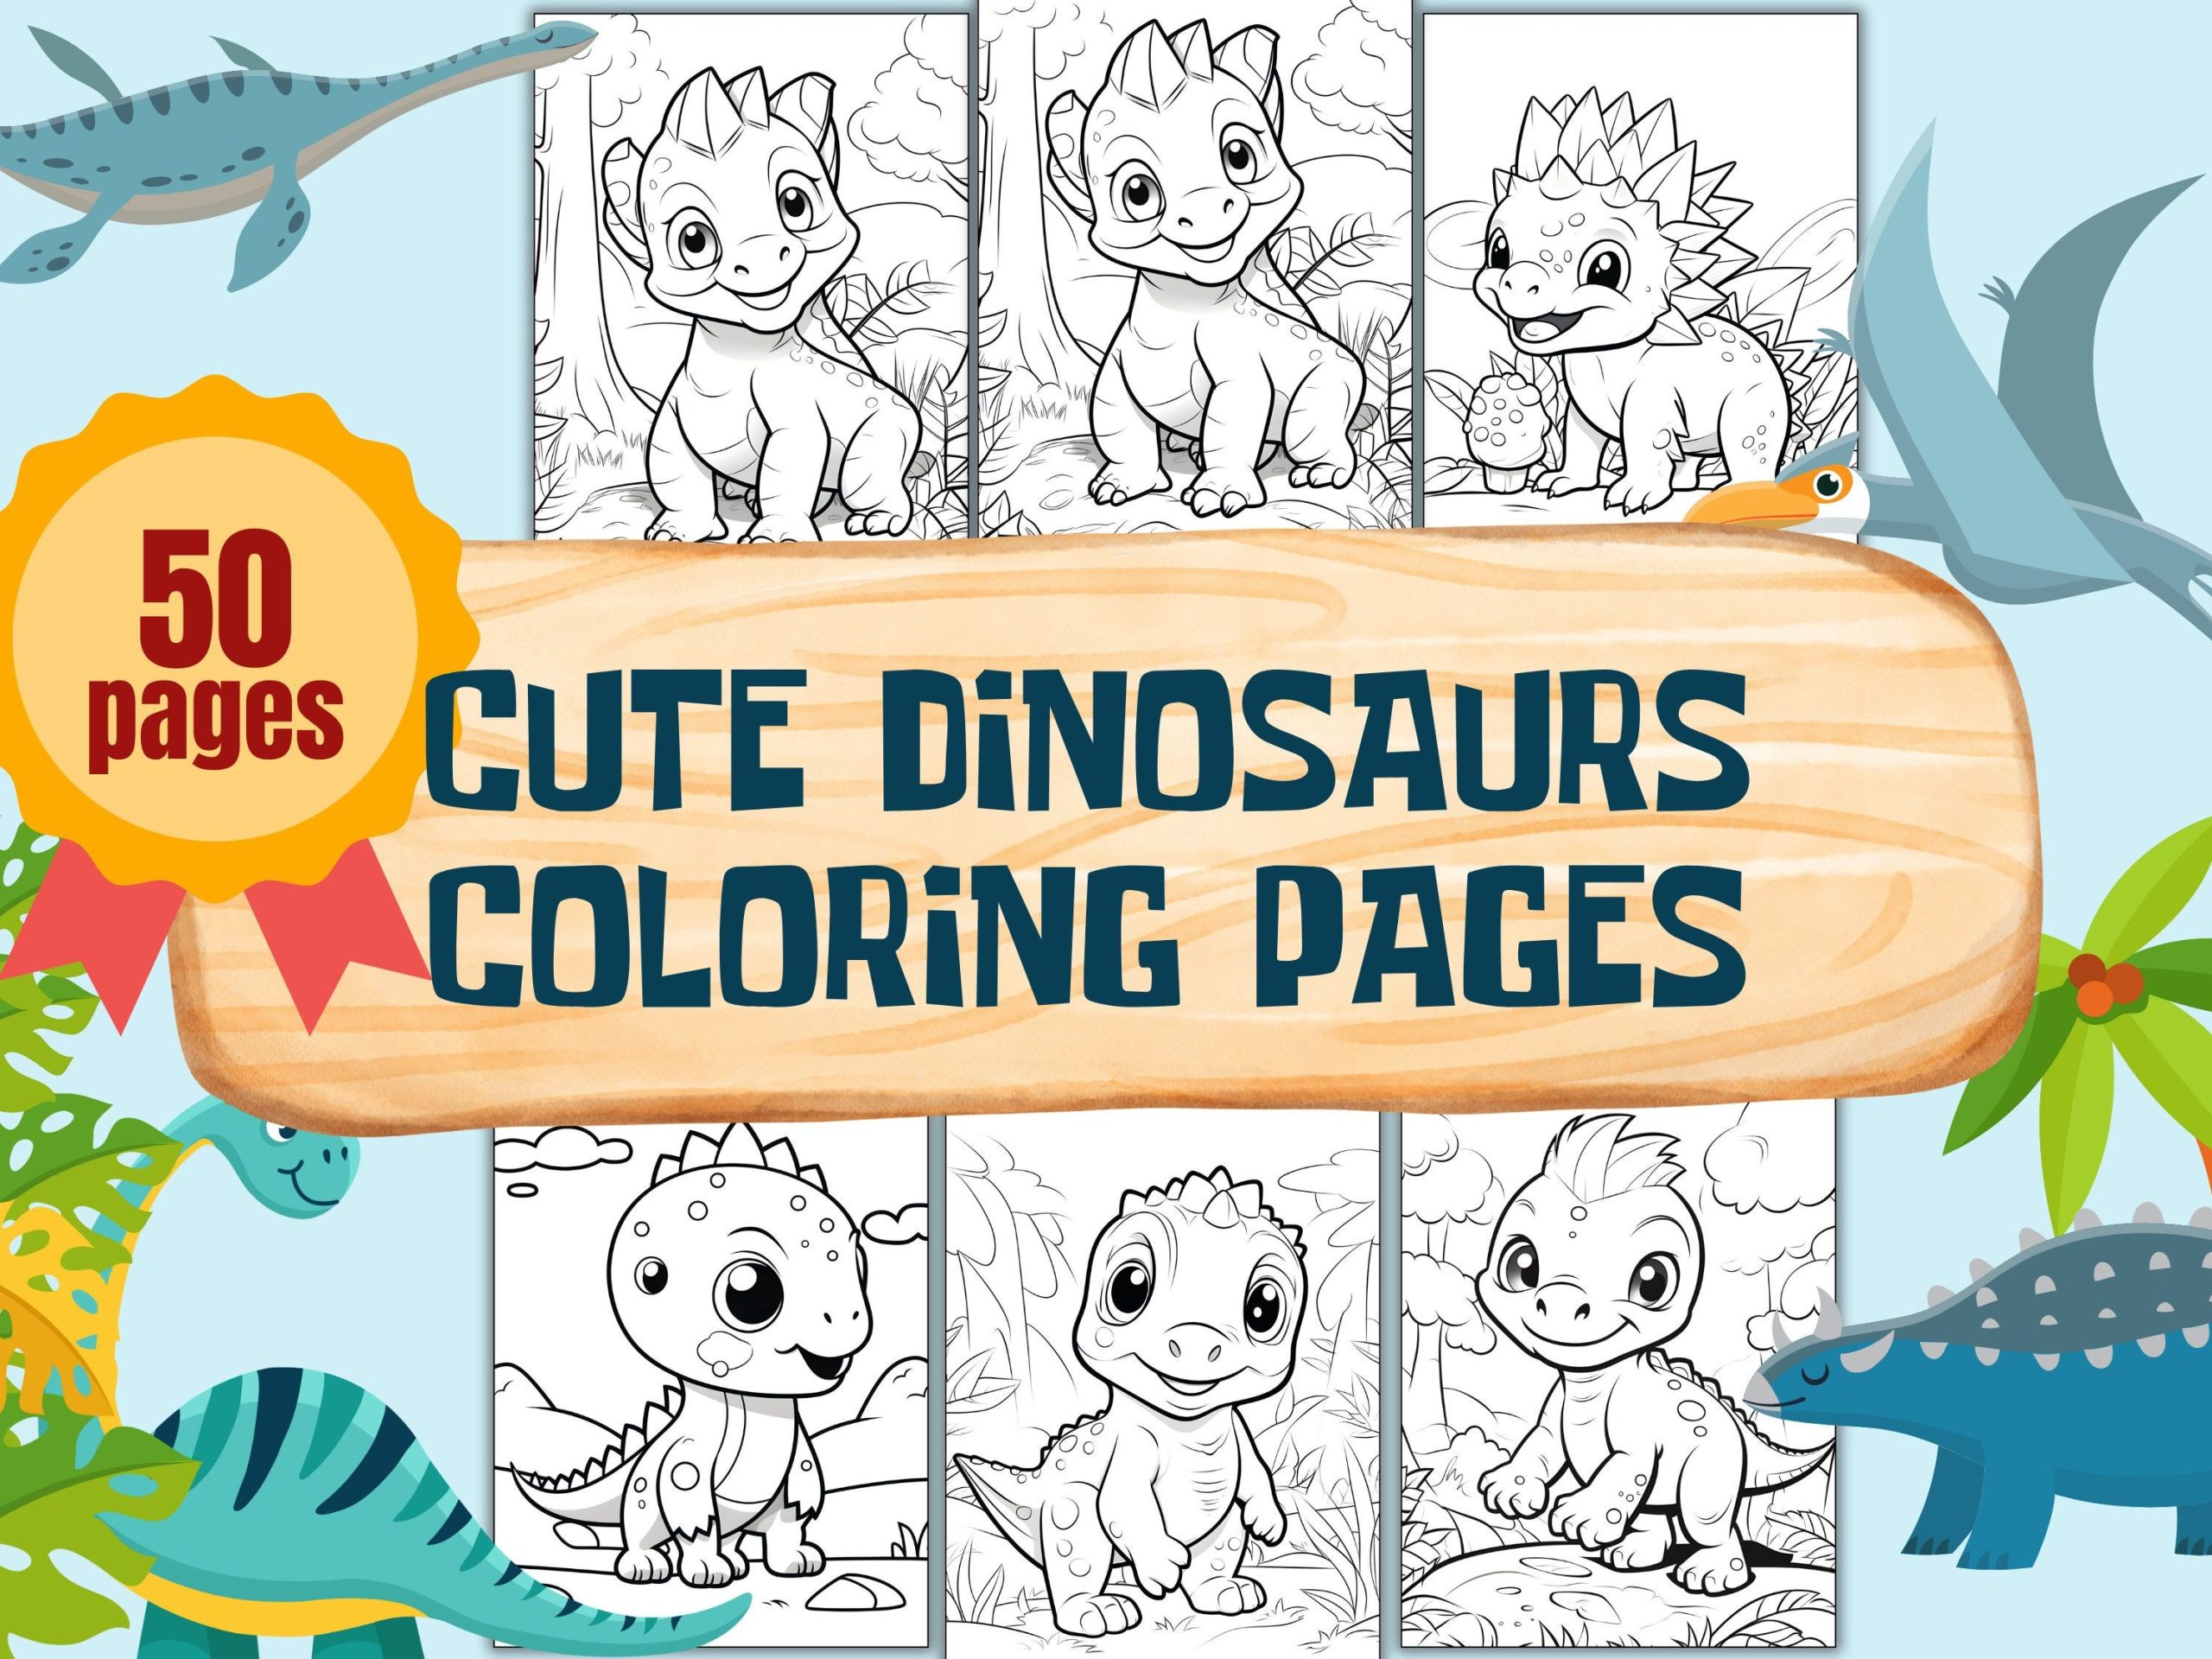 Cute Dinosaur Coloring Pages, Printable Kids Activity, Digital Download, Gift for Nephew, Unique Coloring Gift, Children's Fun, Dino Art Kit